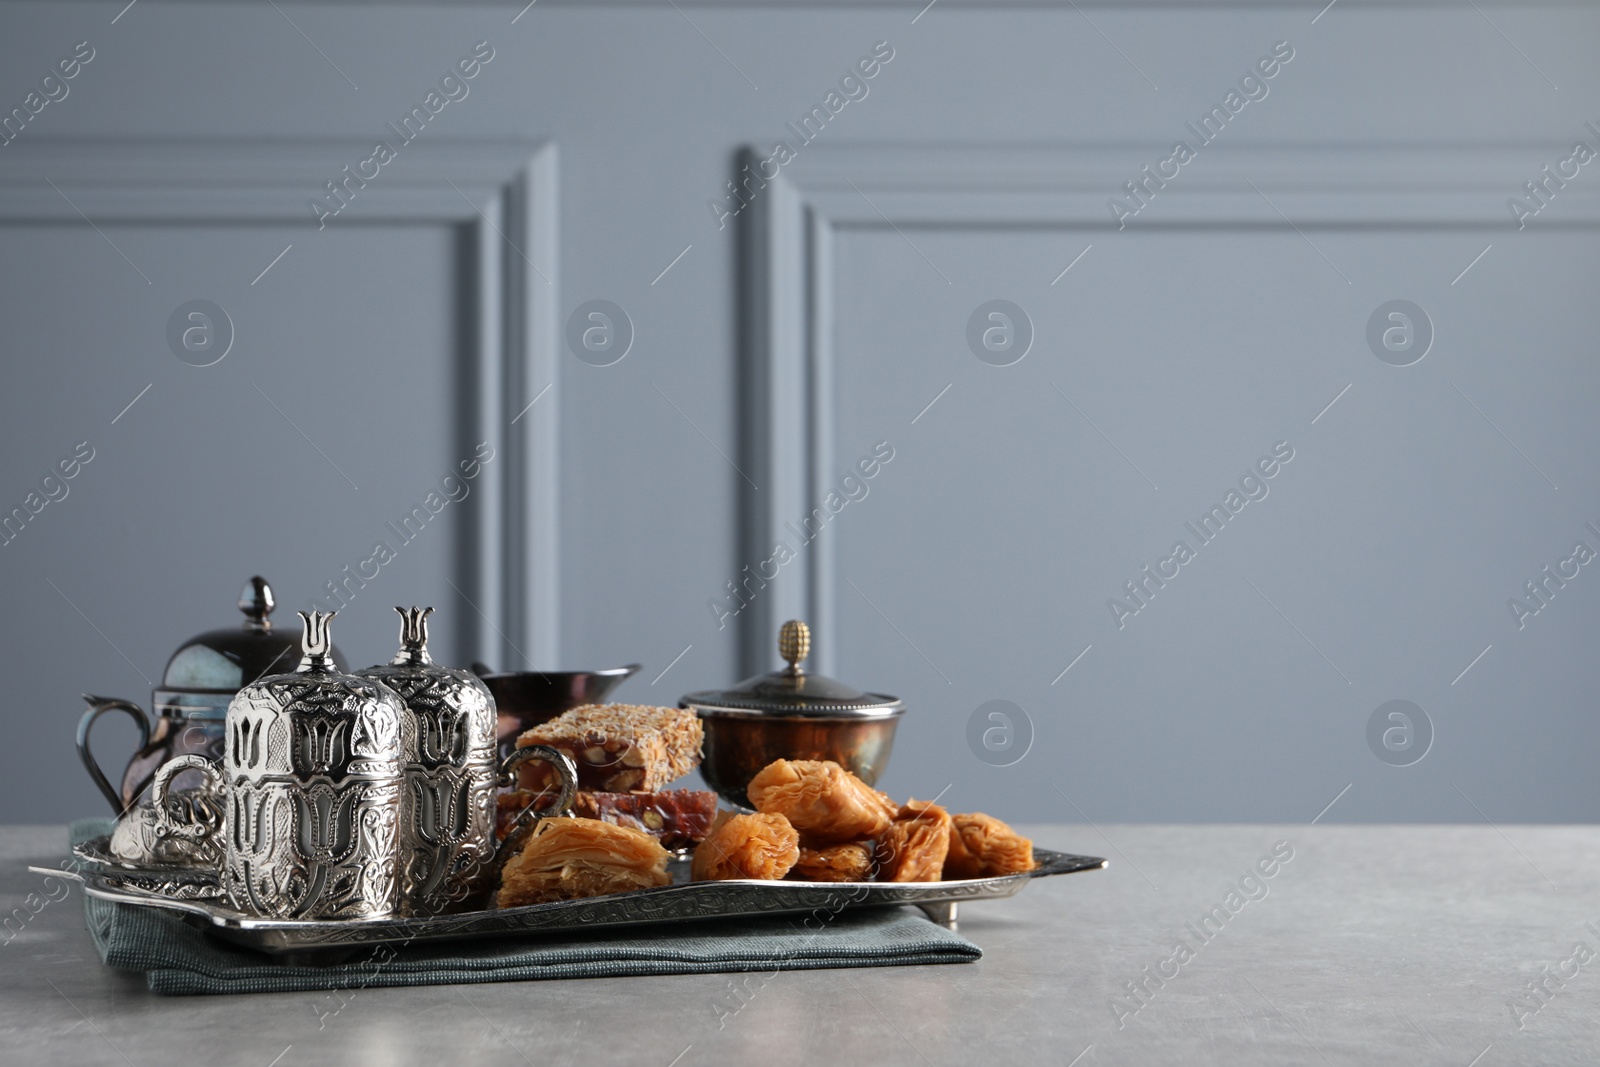 Photo of Tea, baklava dessert and Turkish delight served in vintage tea set on grey textured table, space for text